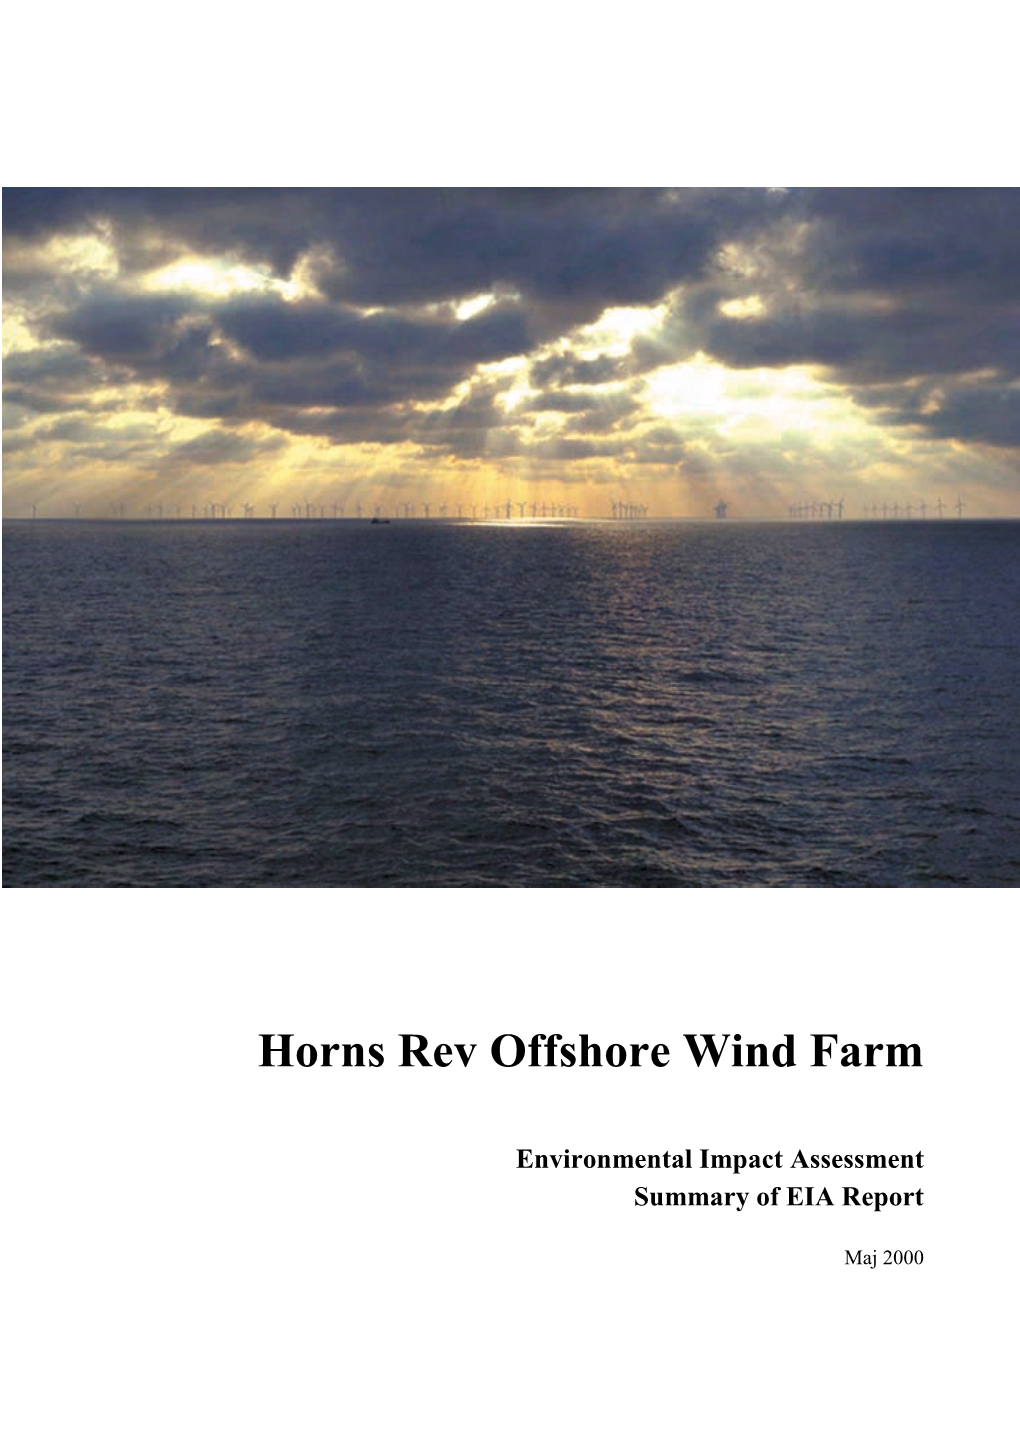 Horns Rev Offshore Wind Farm Environmental Impact Assessment Summary of EIA Report May 2000